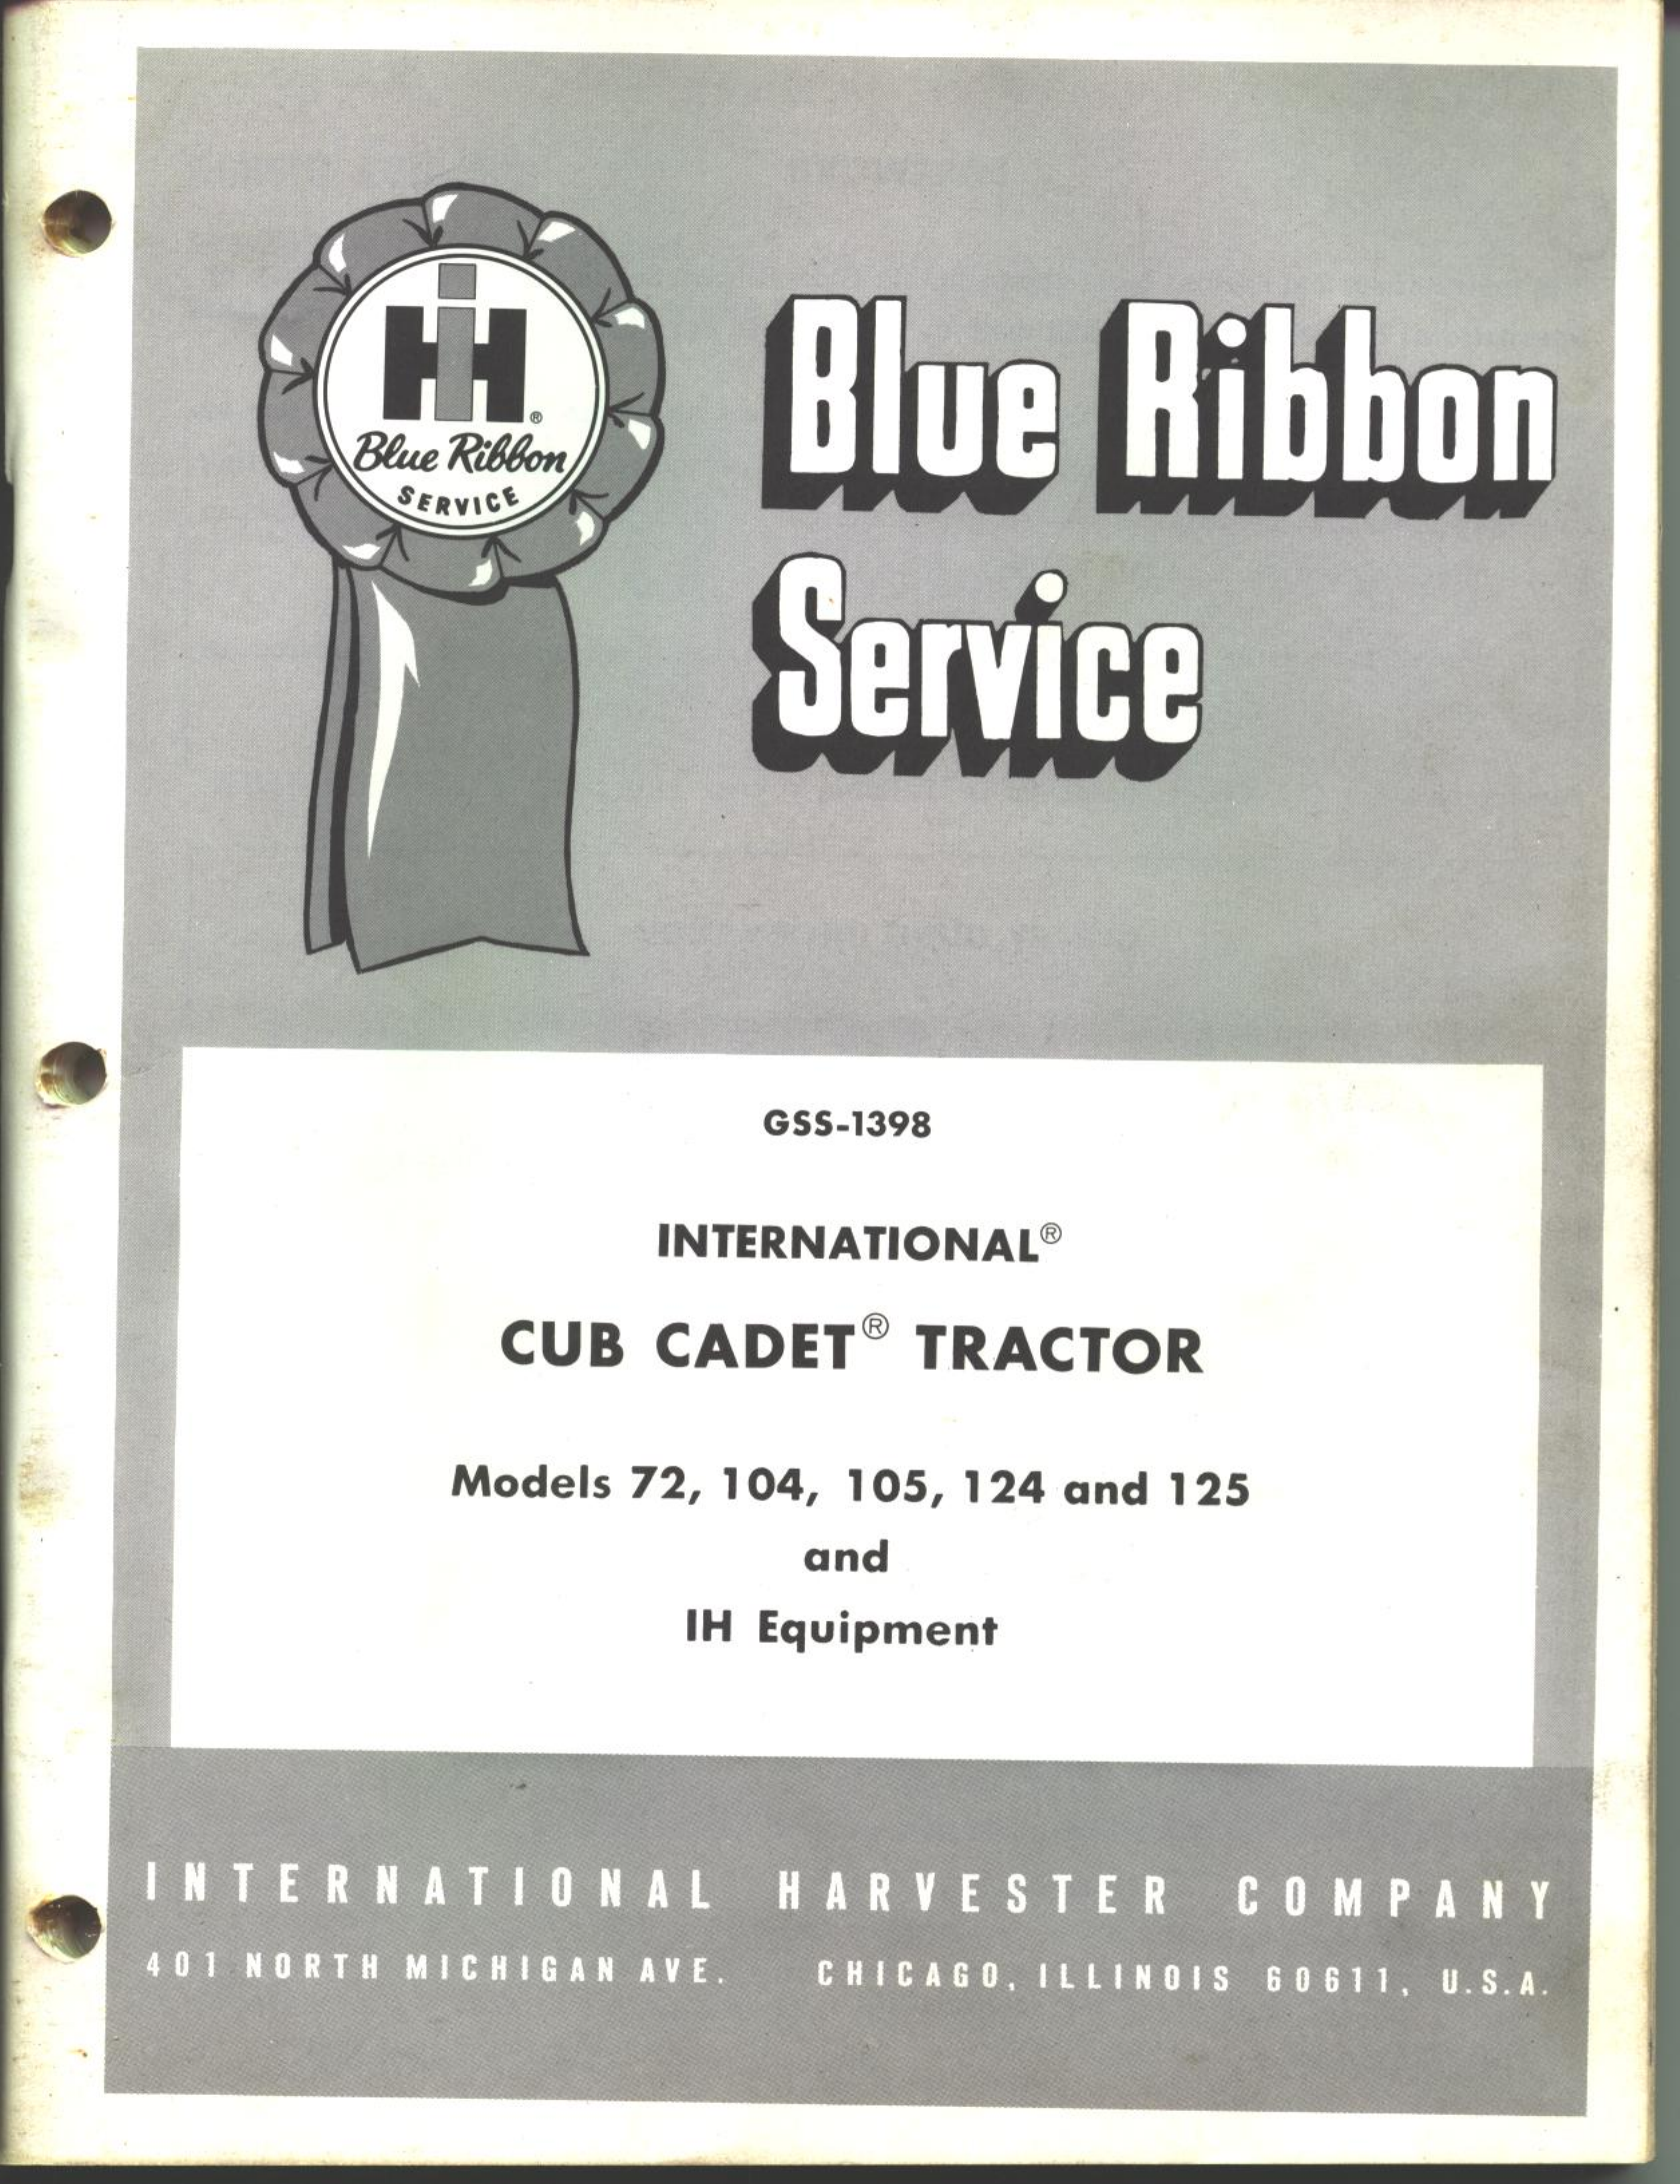 1967-1969 International Cub Cadet™ 72, 104, 105, 124, 125 tractor manual Preview image 1